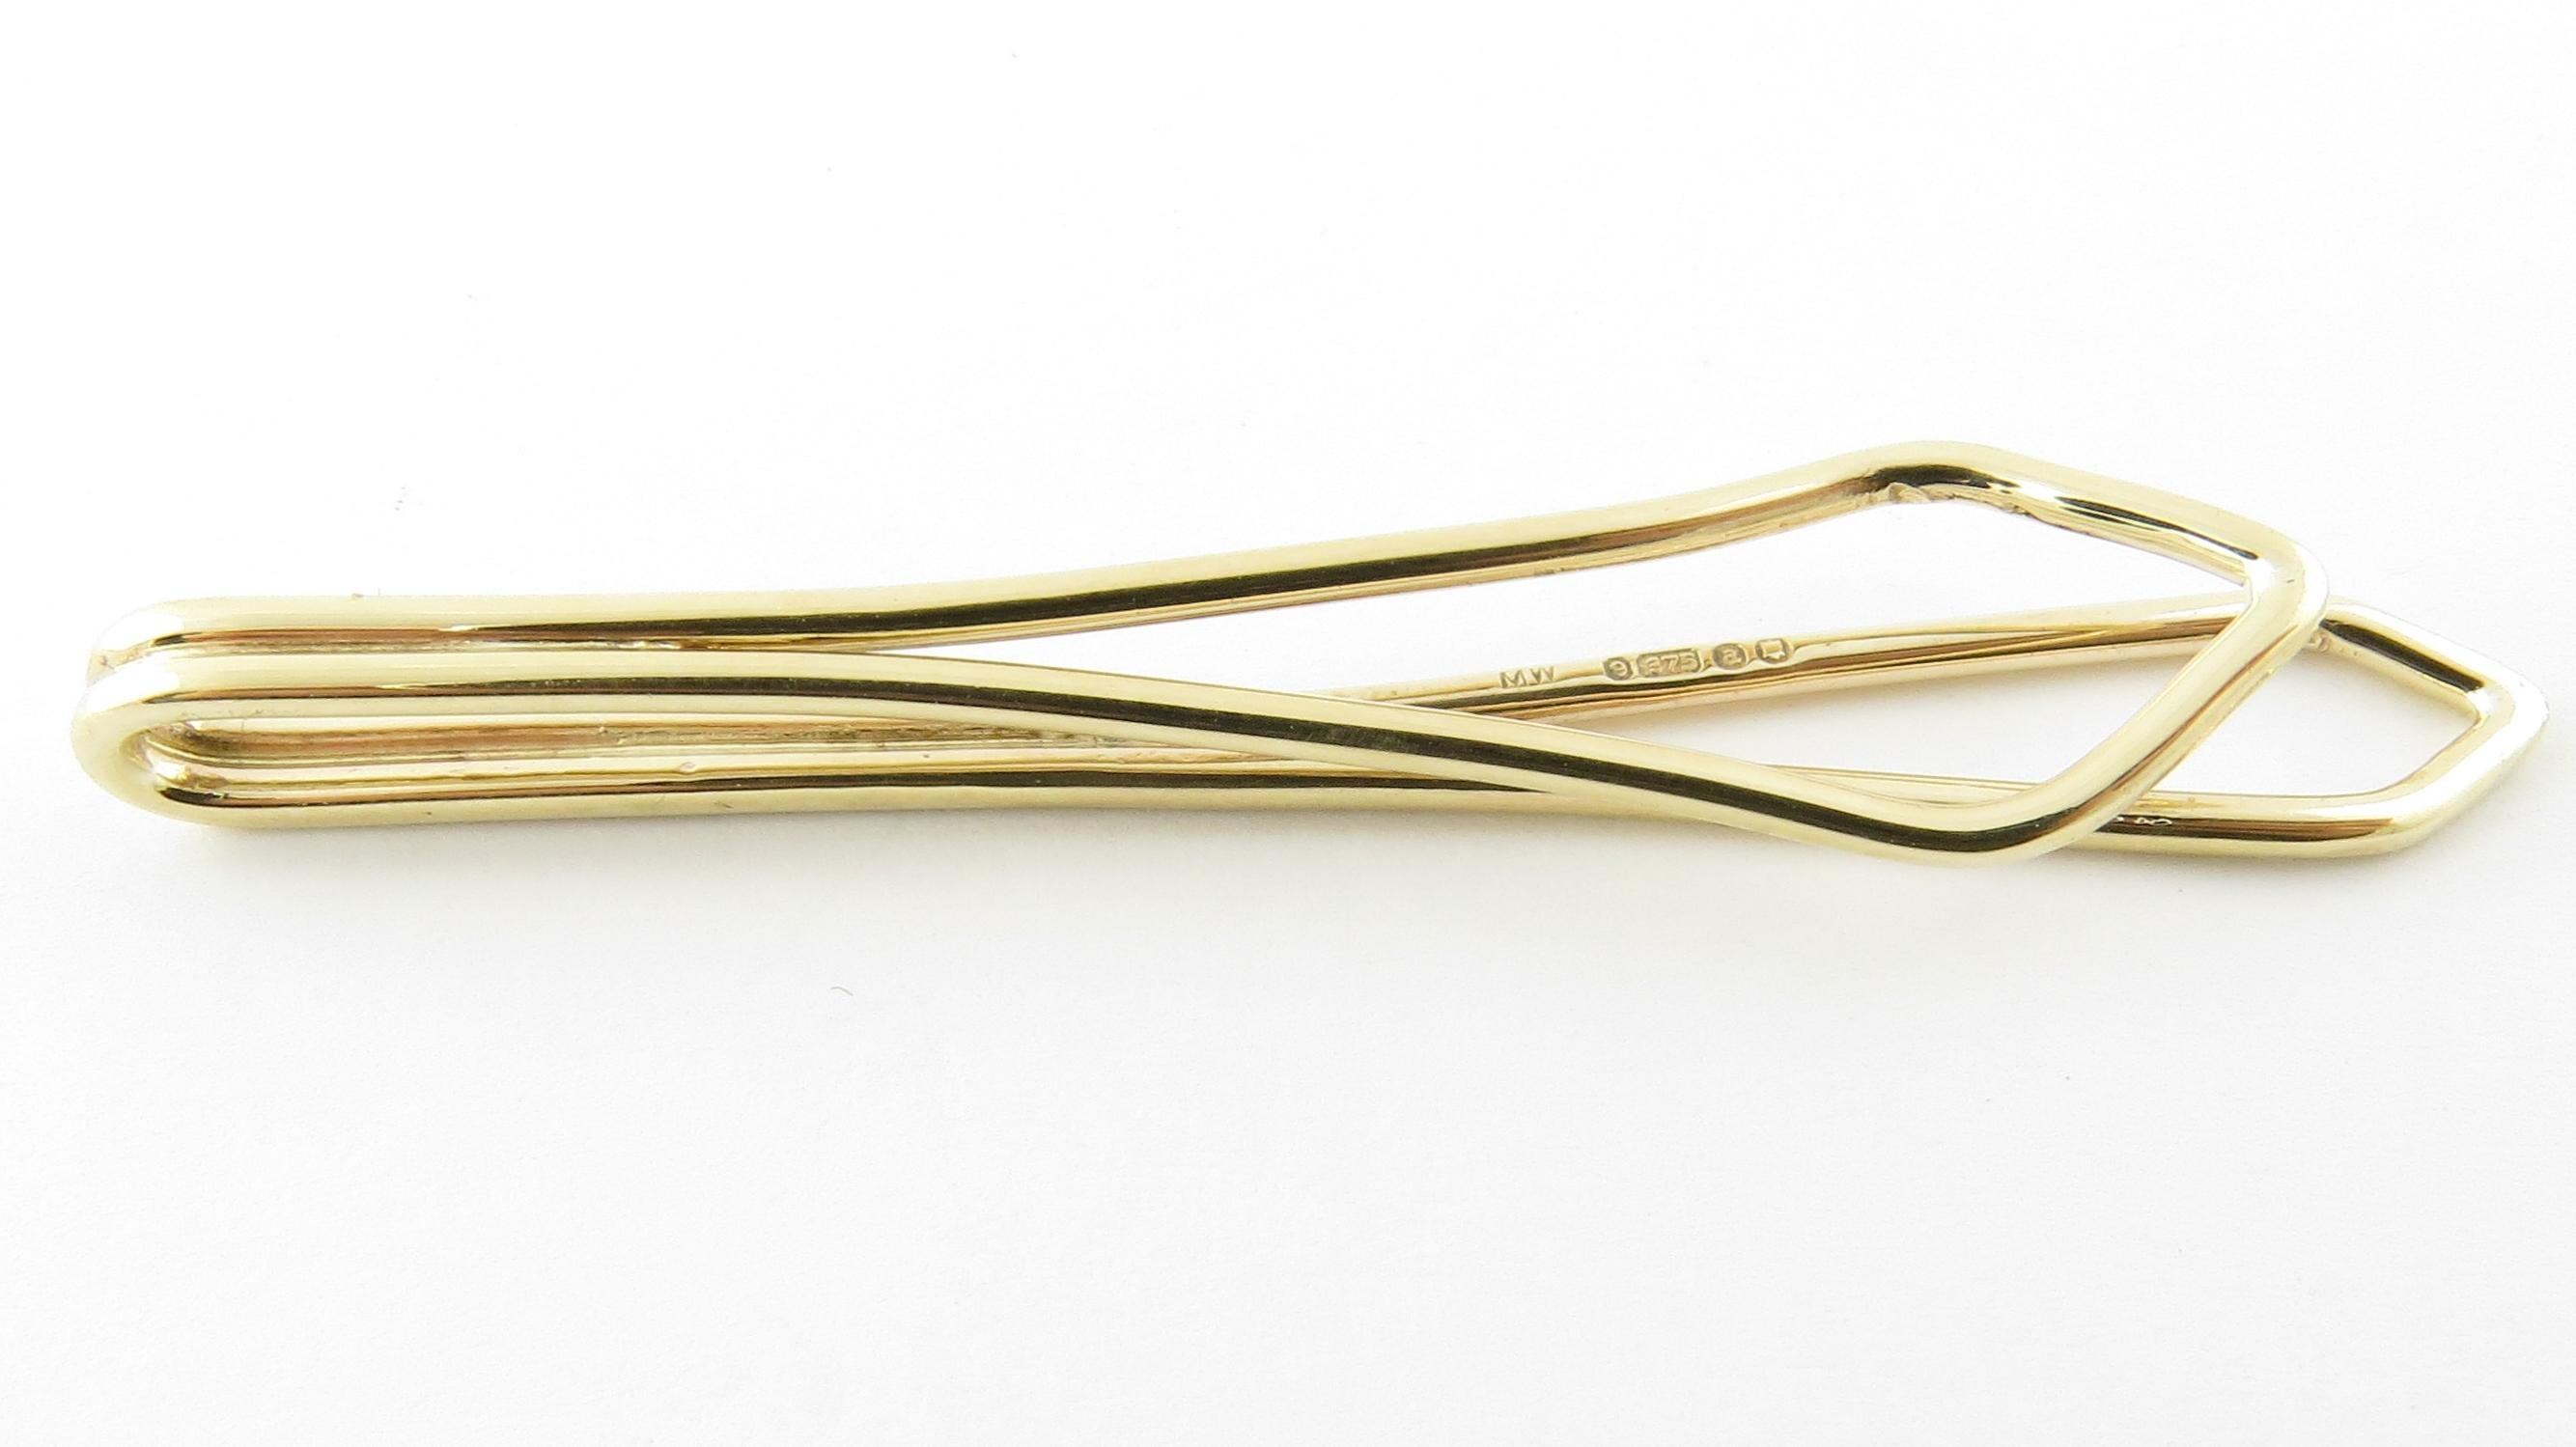 Vintage 9 Karat Yellow Gold Tie Bar

This lovely tie bar is crafted in beautifully detailed 9K yellow gold.

Size: 60 mm x 12 mm

Weight: 3.0 dwt. / 4.7 gr.

Acid tested for 9K gold.

Very good condition, professionally polished.

Will come packaged